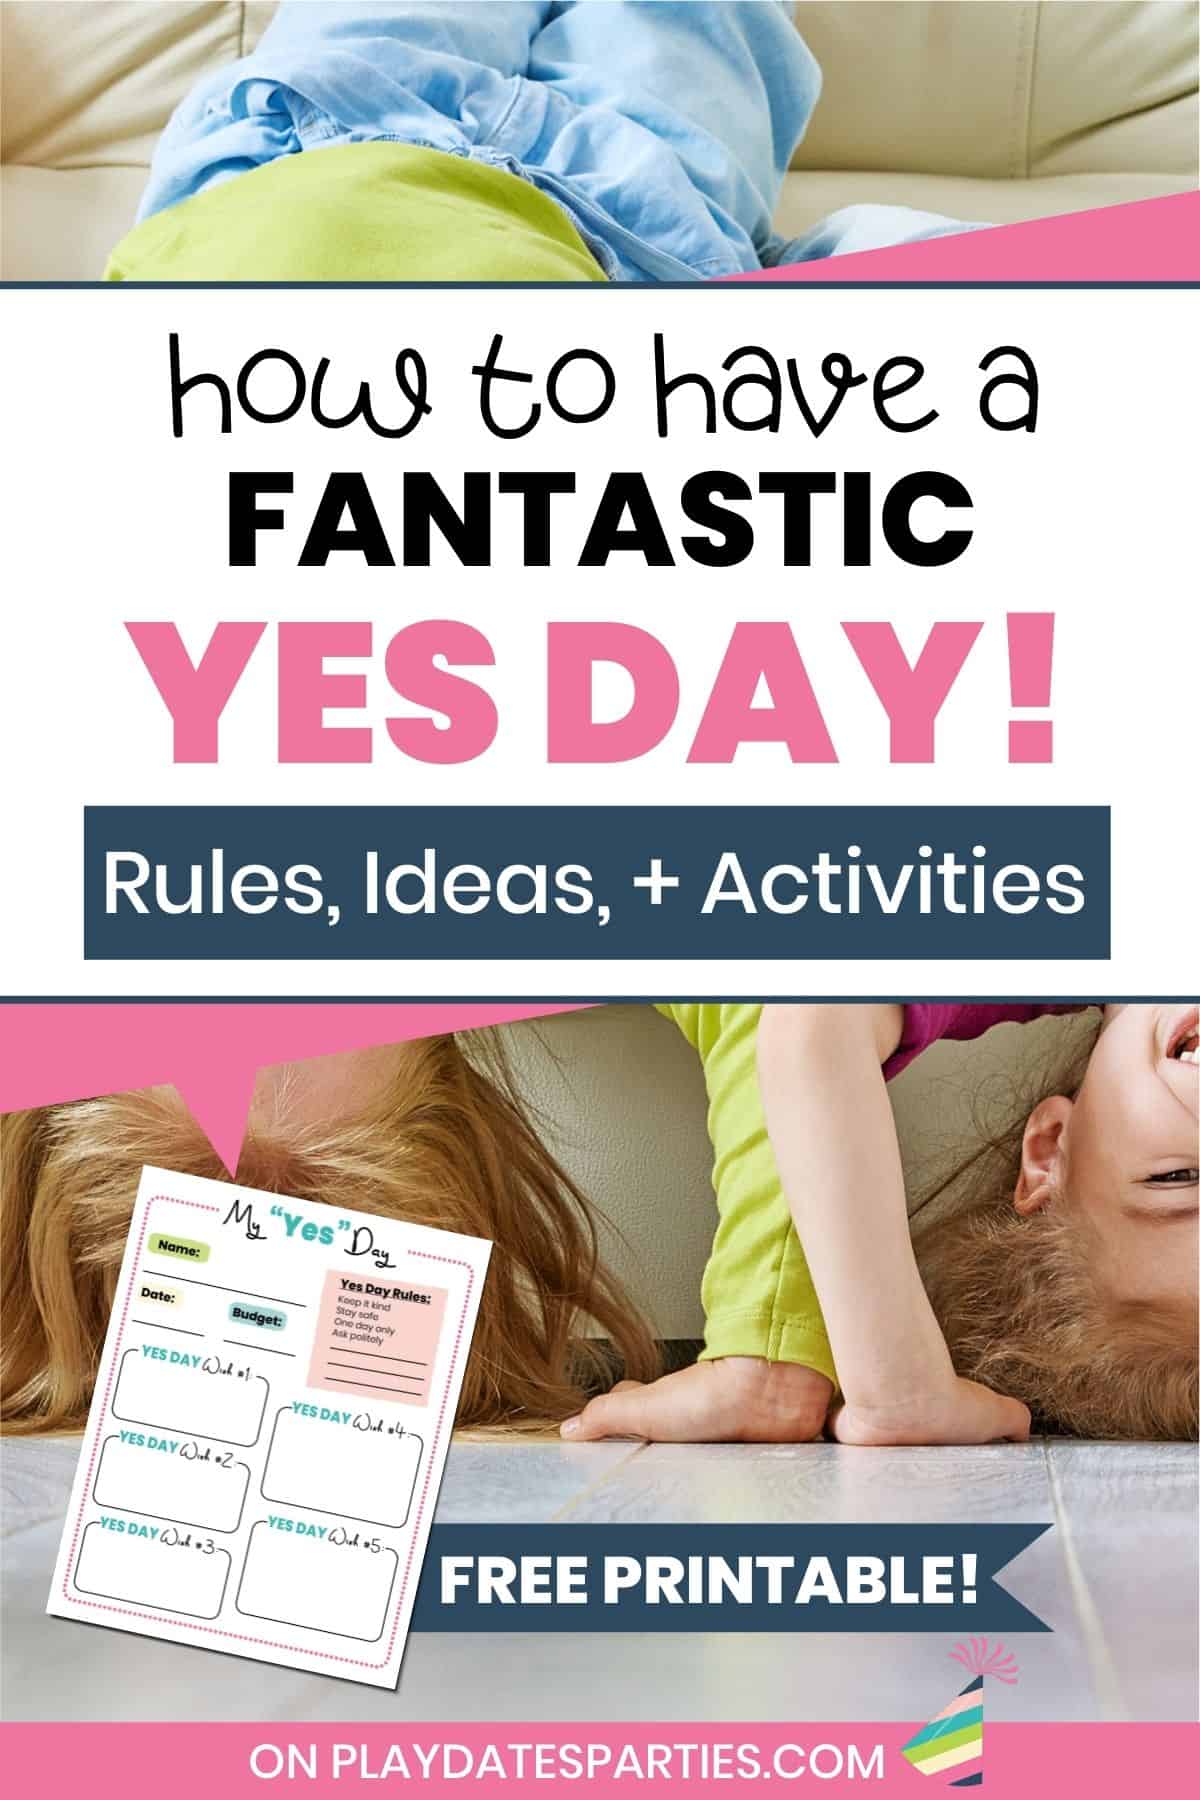 image of children being silly upside down with text overlay that says how to have a fantastic yes day! Rules, ideas, & activities, + a free printable